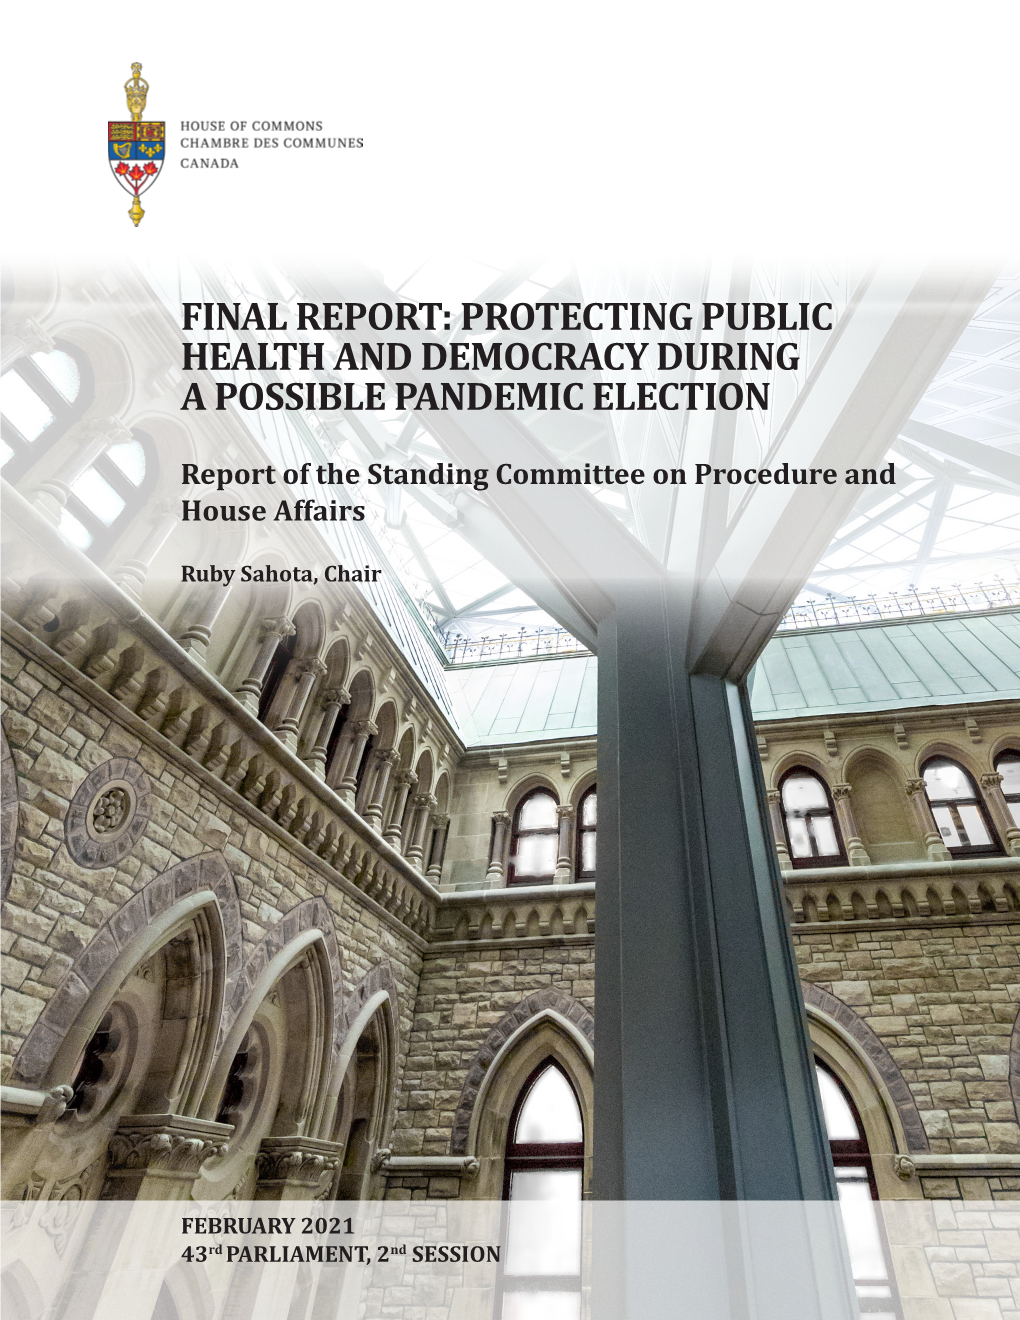 Final Report: Protecting Public Health and Democracy During a Possible Pandemic Election